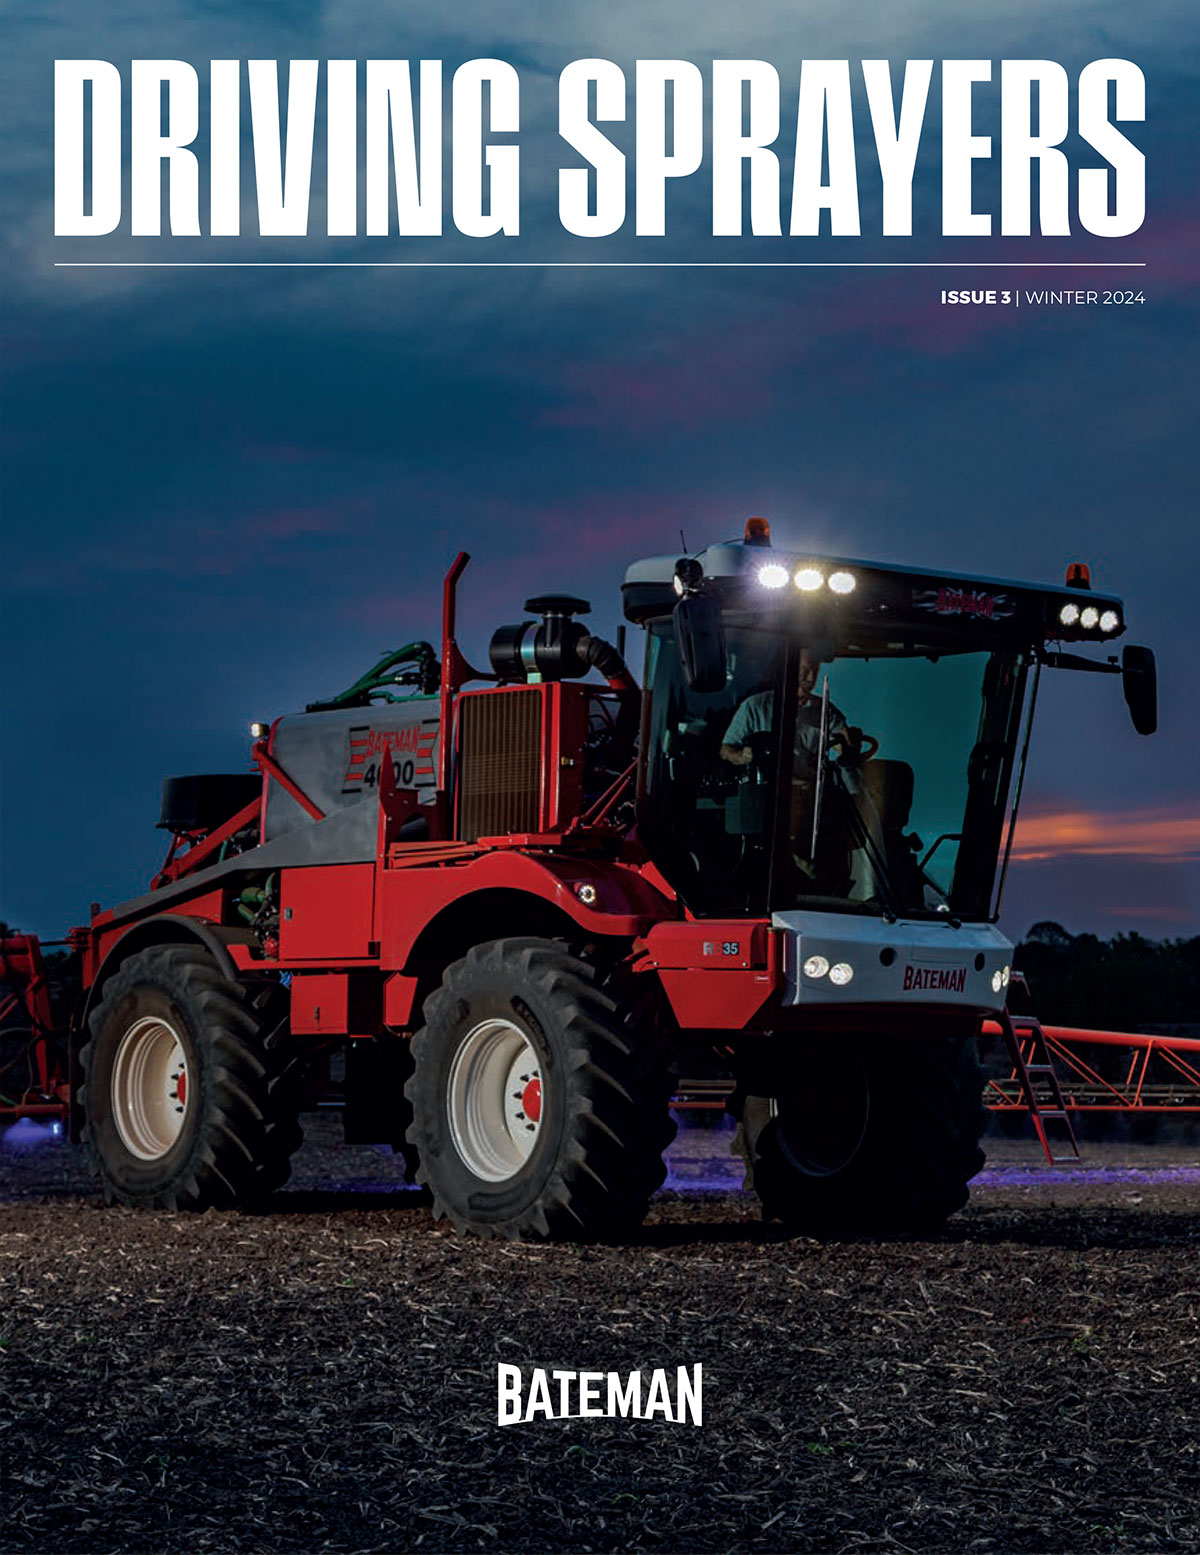 driving sprayers magazine cover for issue 3